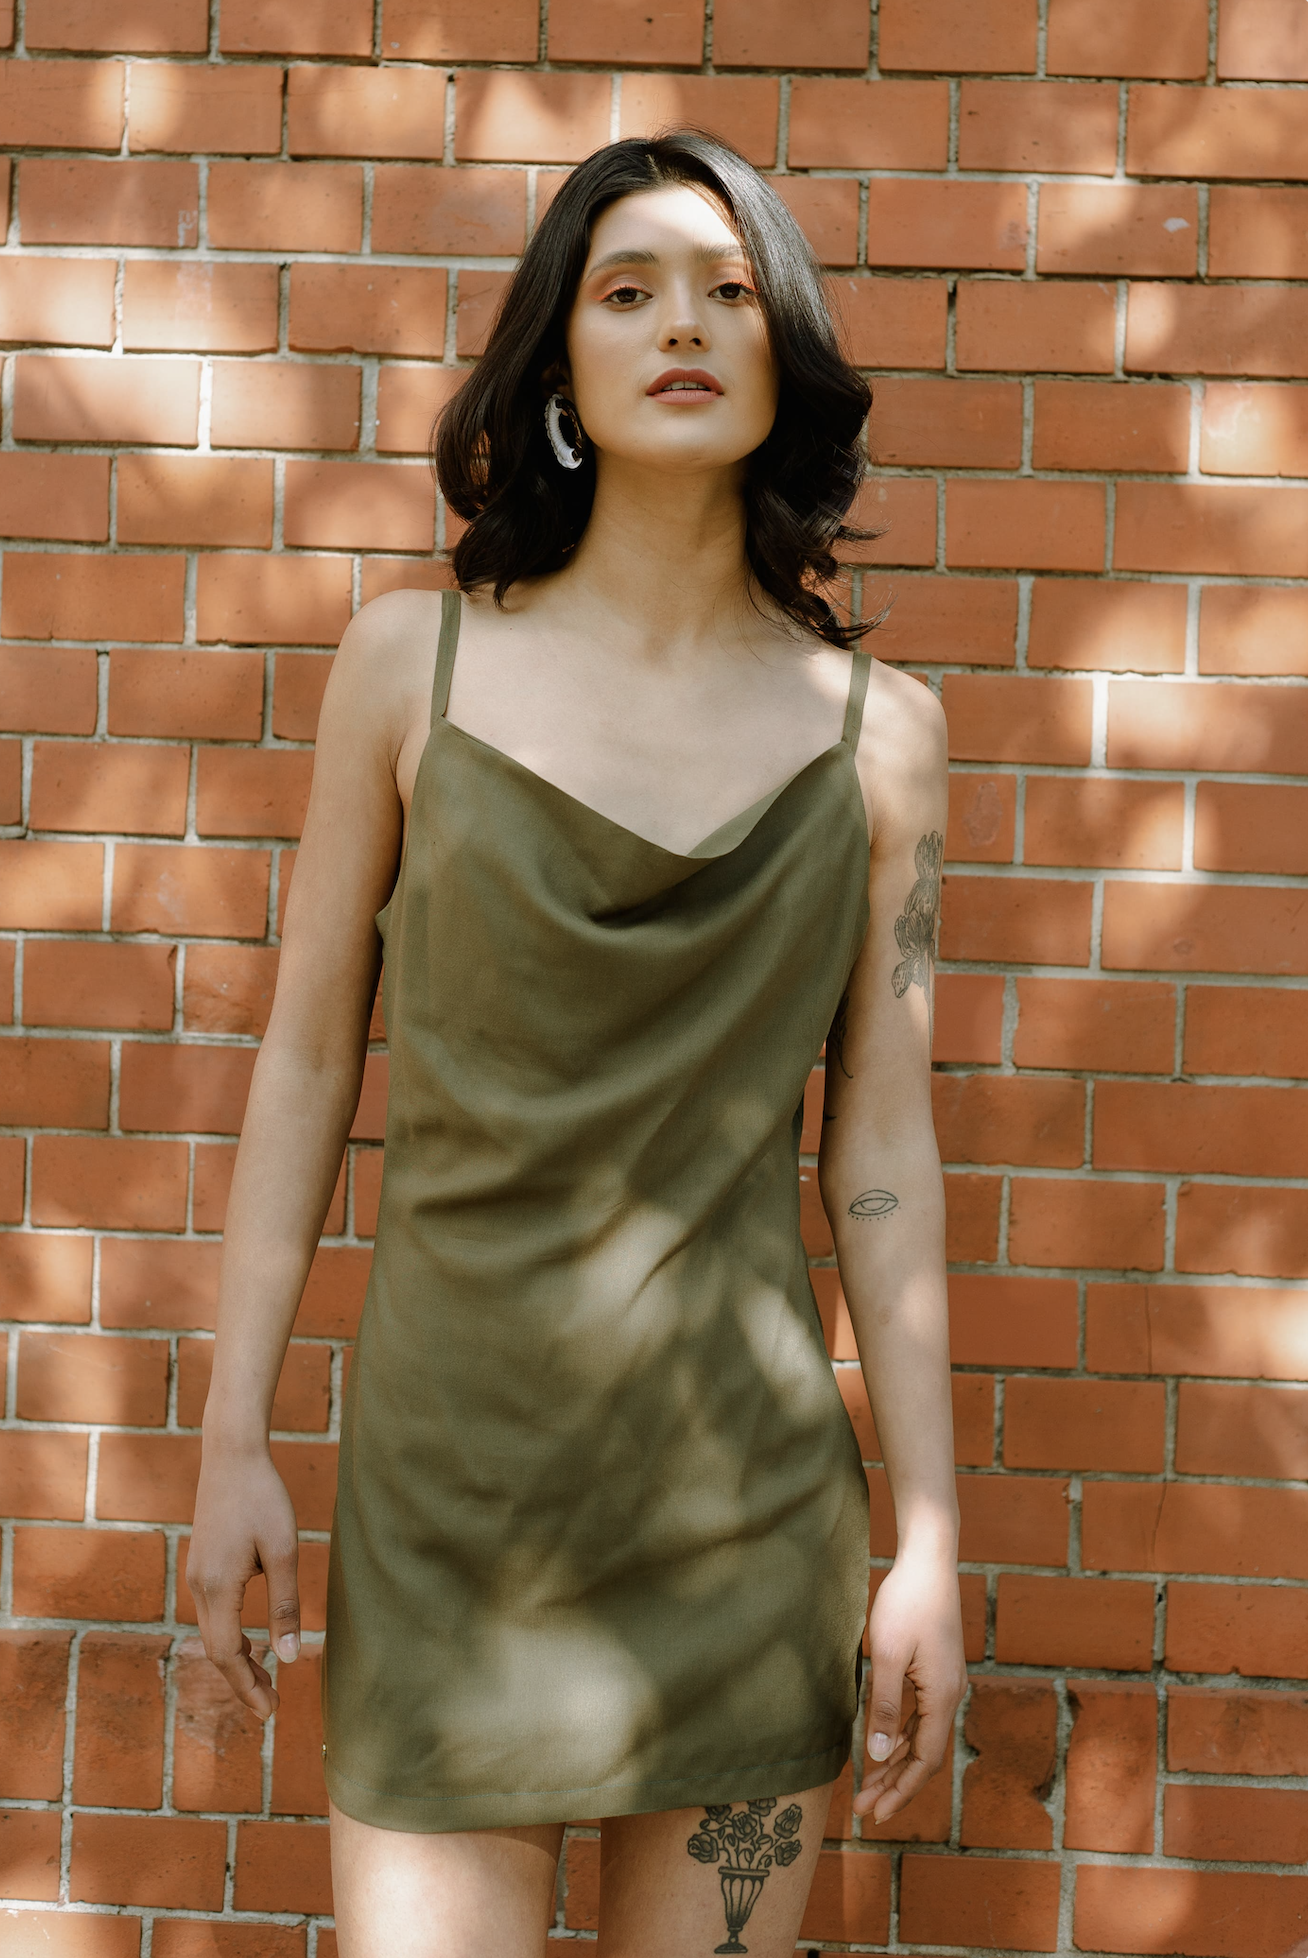 Woman wearing the Delilah Dress sewing pattern from JULIANA MARTEJEVS on The Fold Line. A slip dress pattern made in viscose fabrics, featuring a low waterfall neckline, spaghetti straps and mini length.